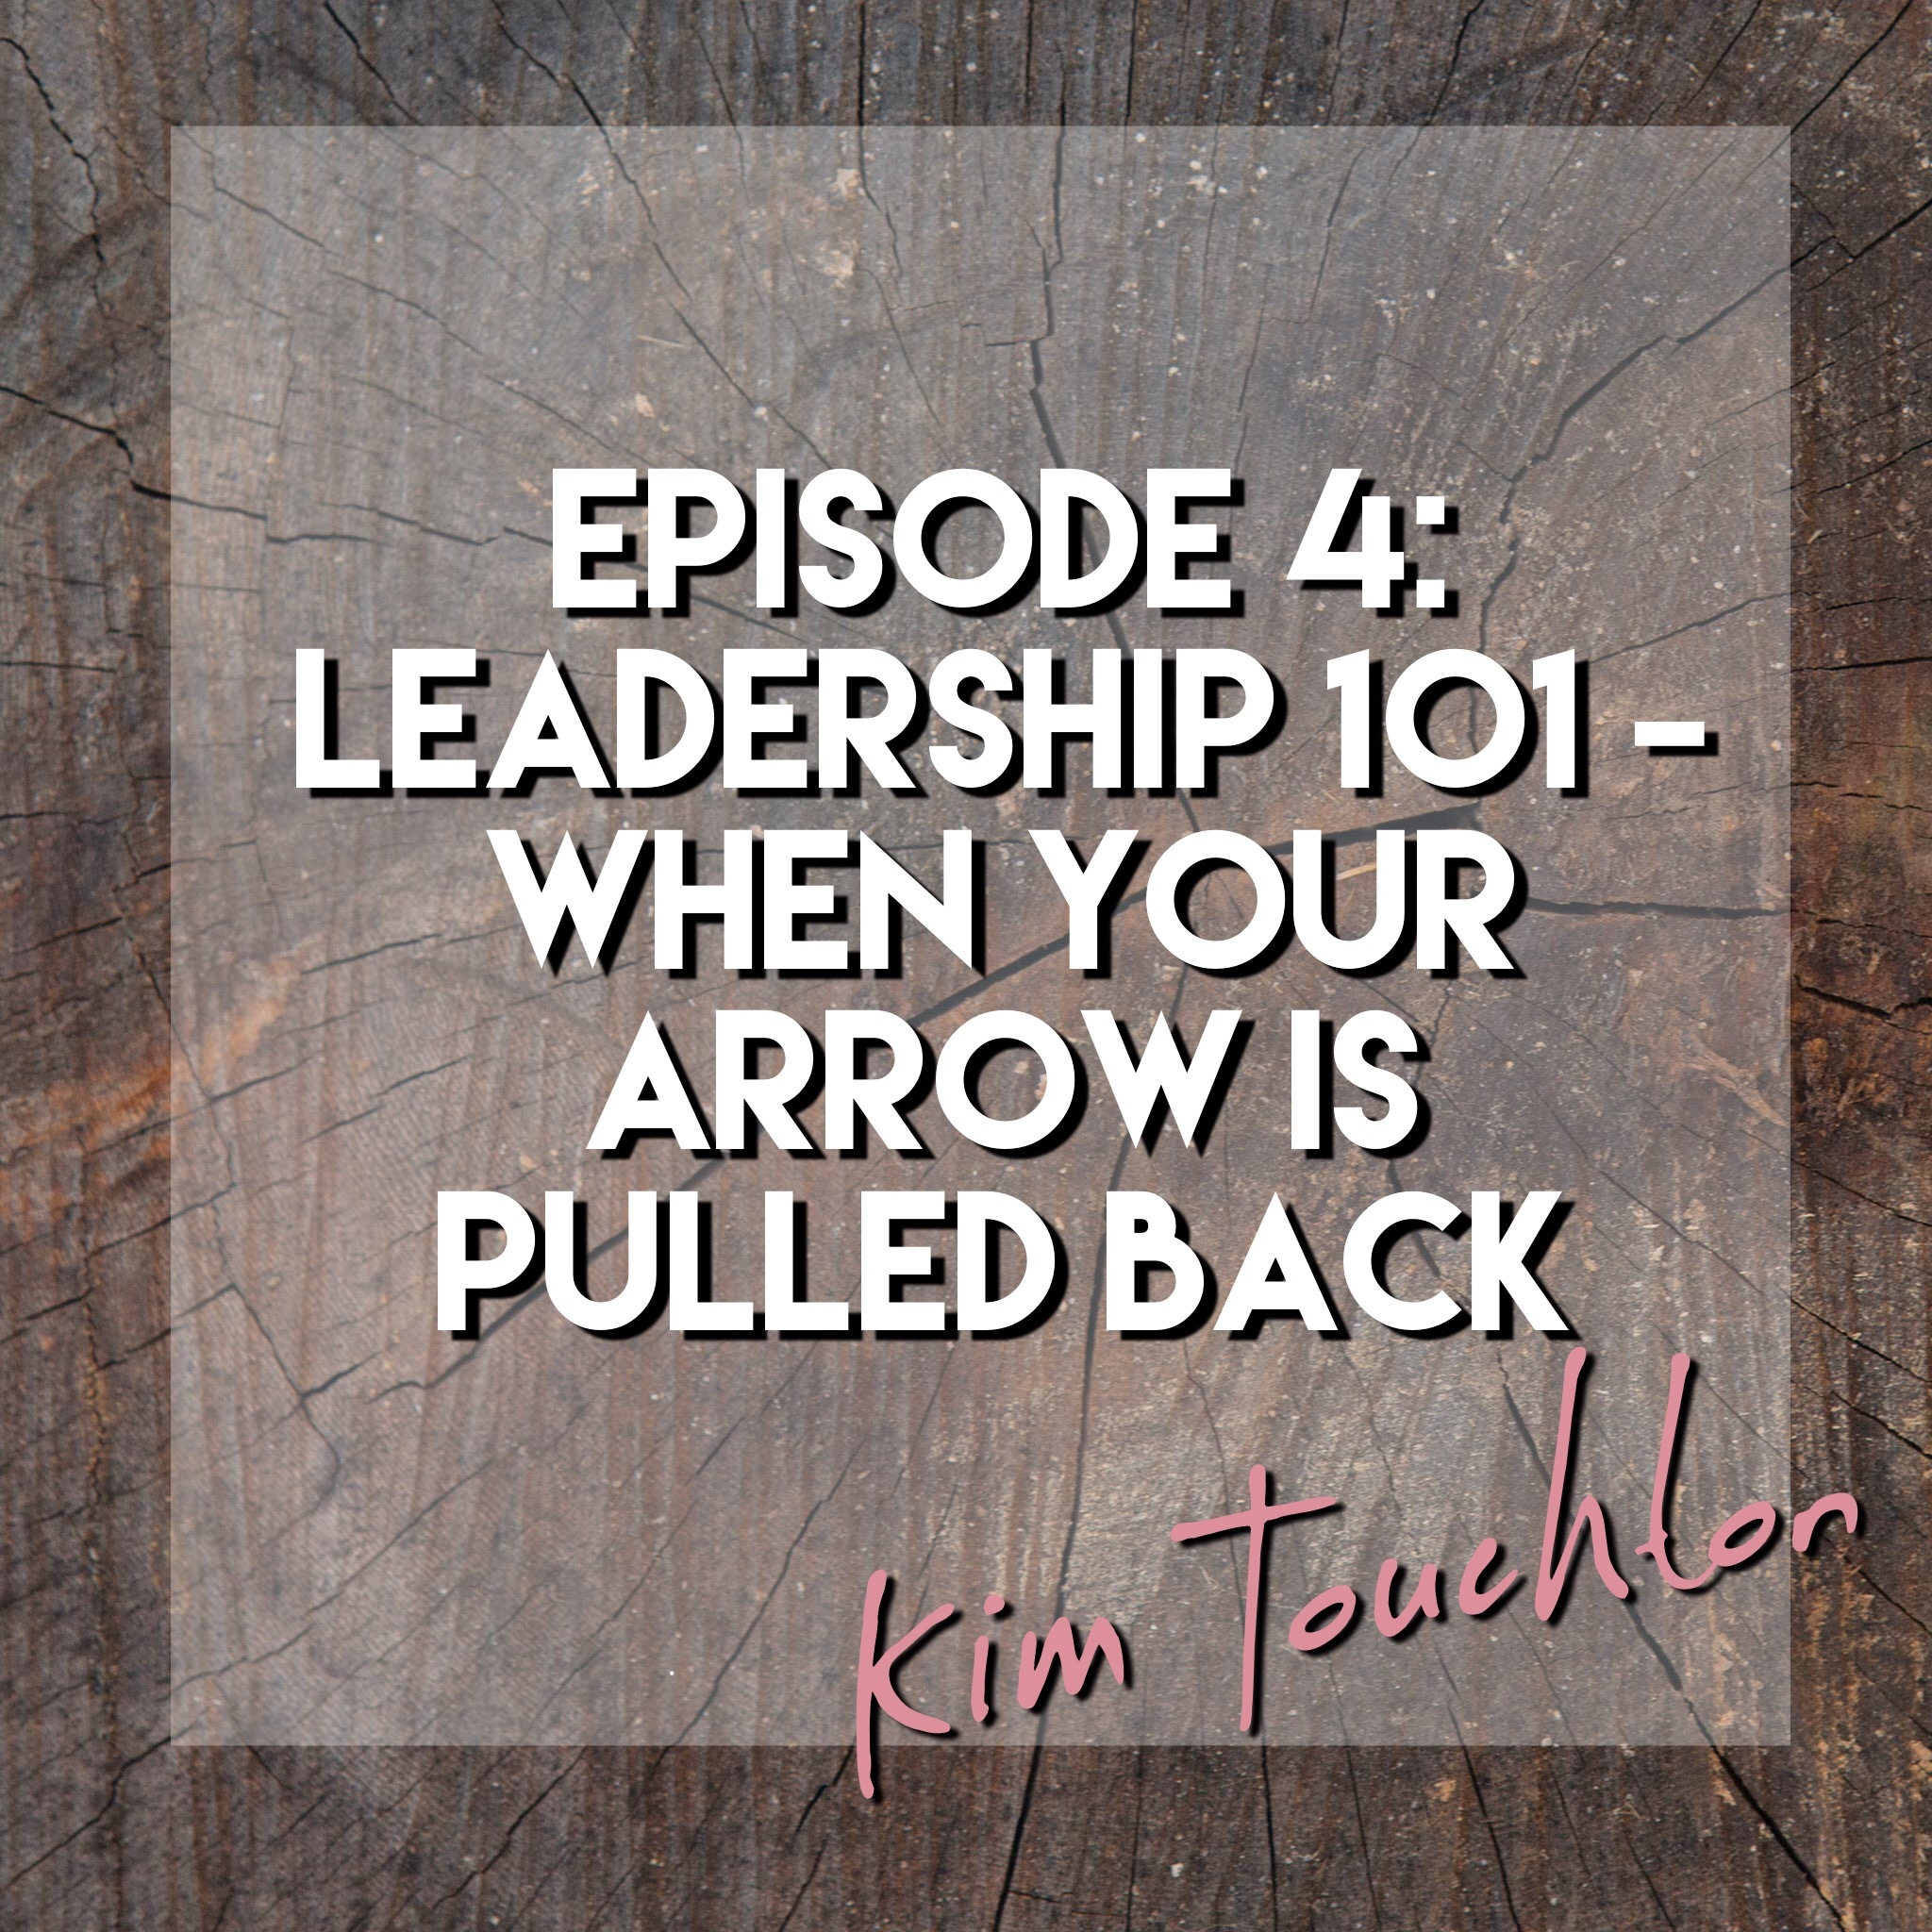 Episode 4: Leadership 101 - When your arrow is pulled back